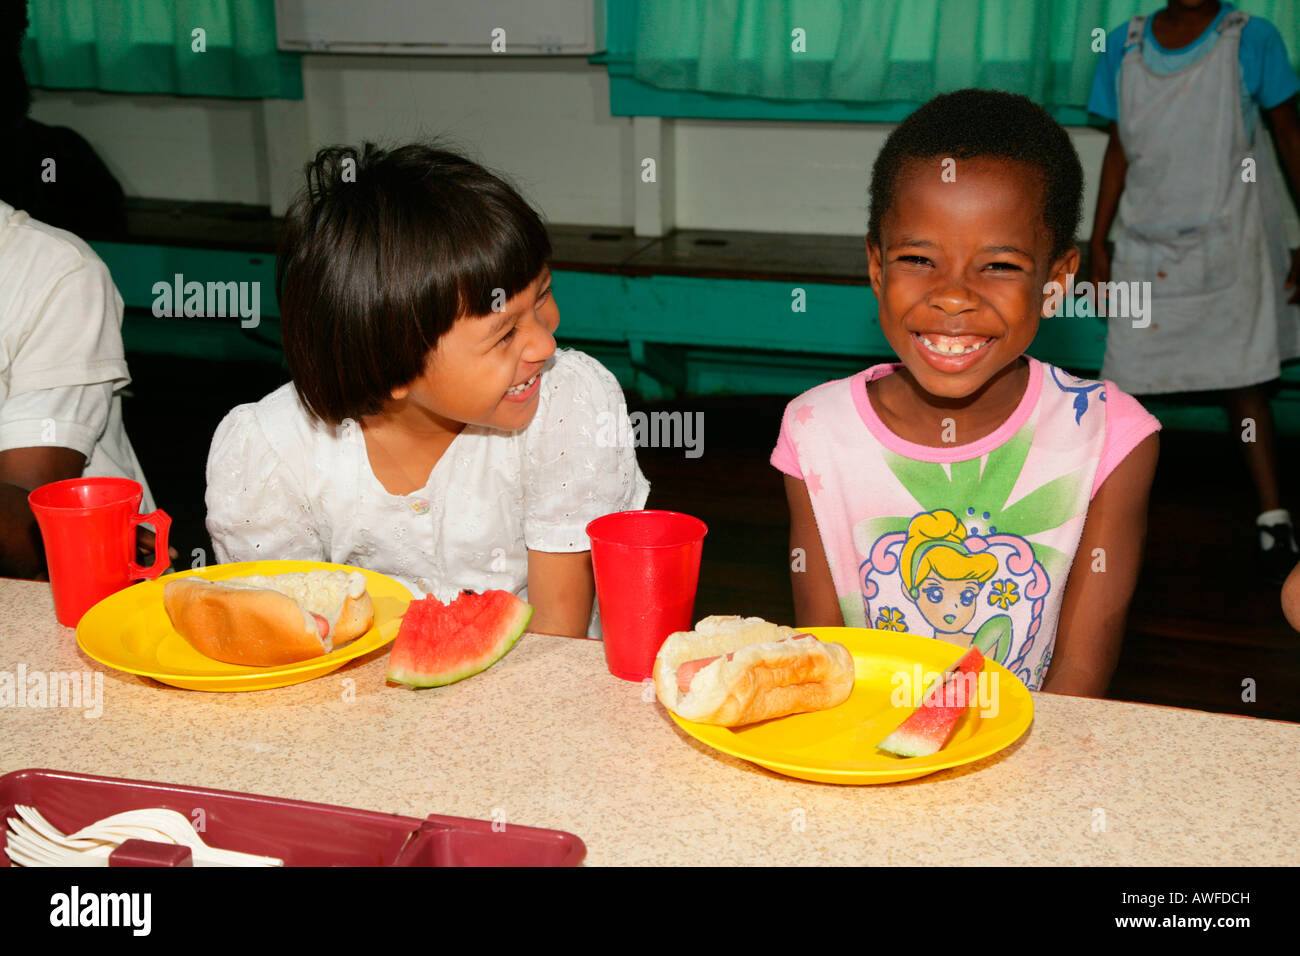 Two girls with full plates, everyday life at an Ursuline convent and orphanage, Georgetown, Guyana, South America Stock Photo